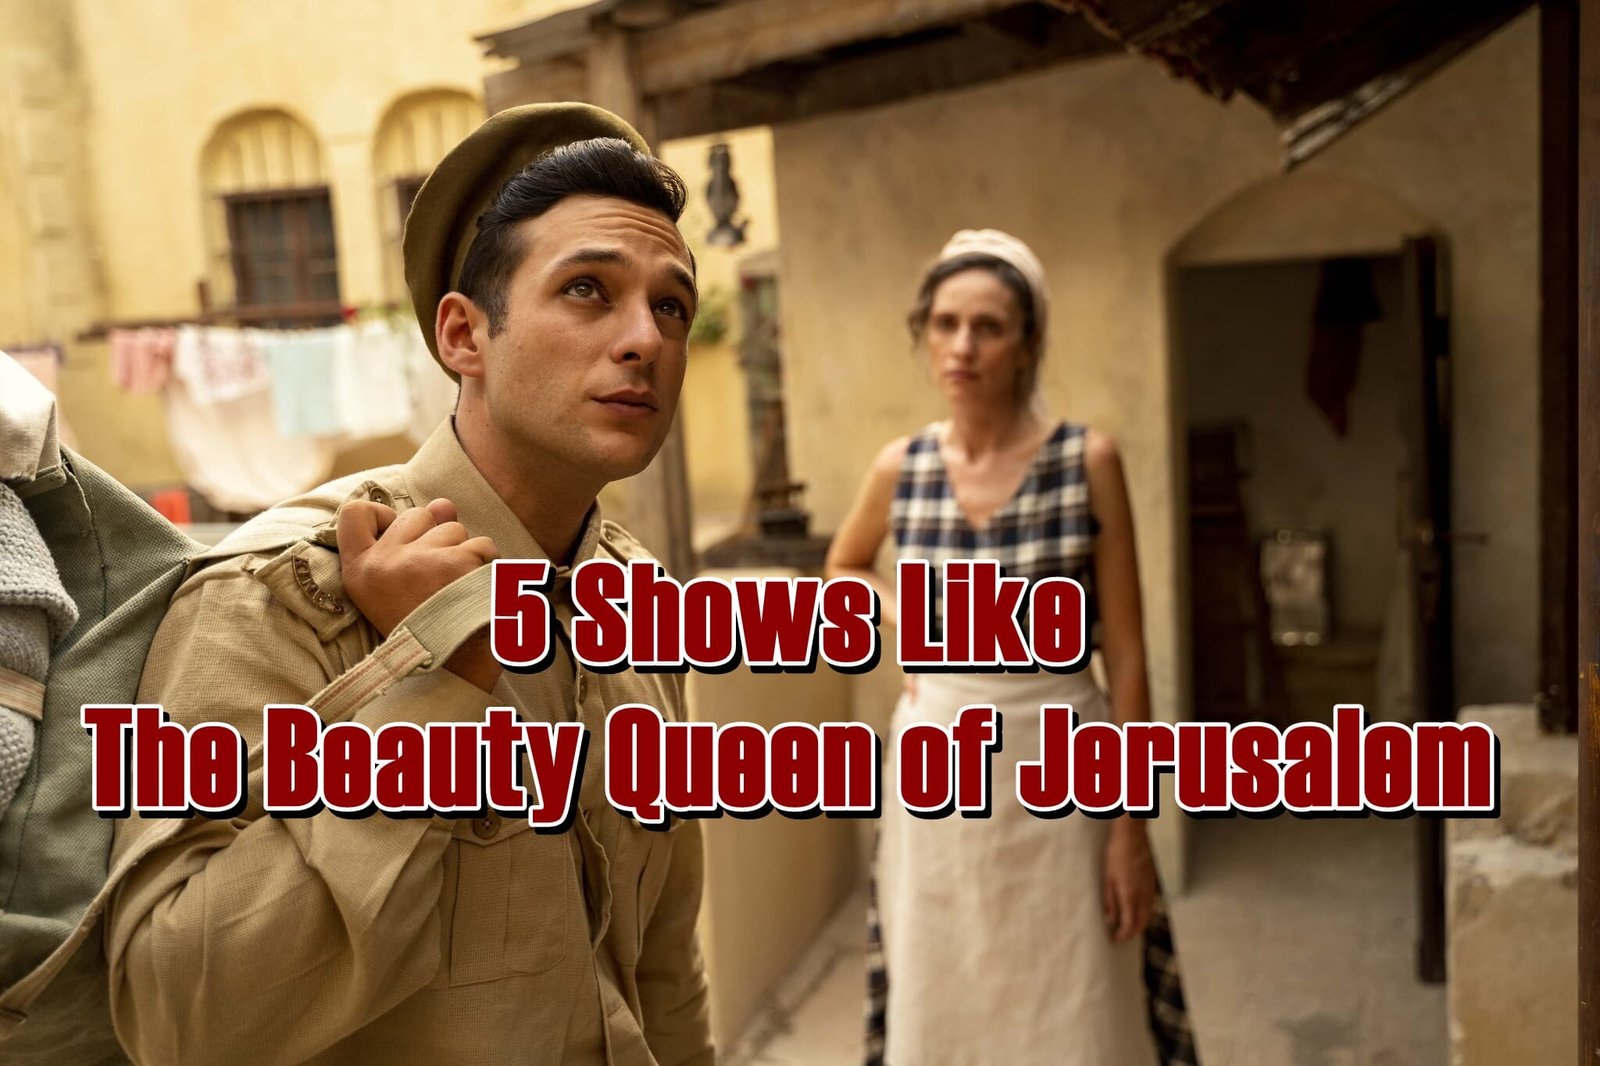 5 Shows Like The Beauty Queen of Jerusalem